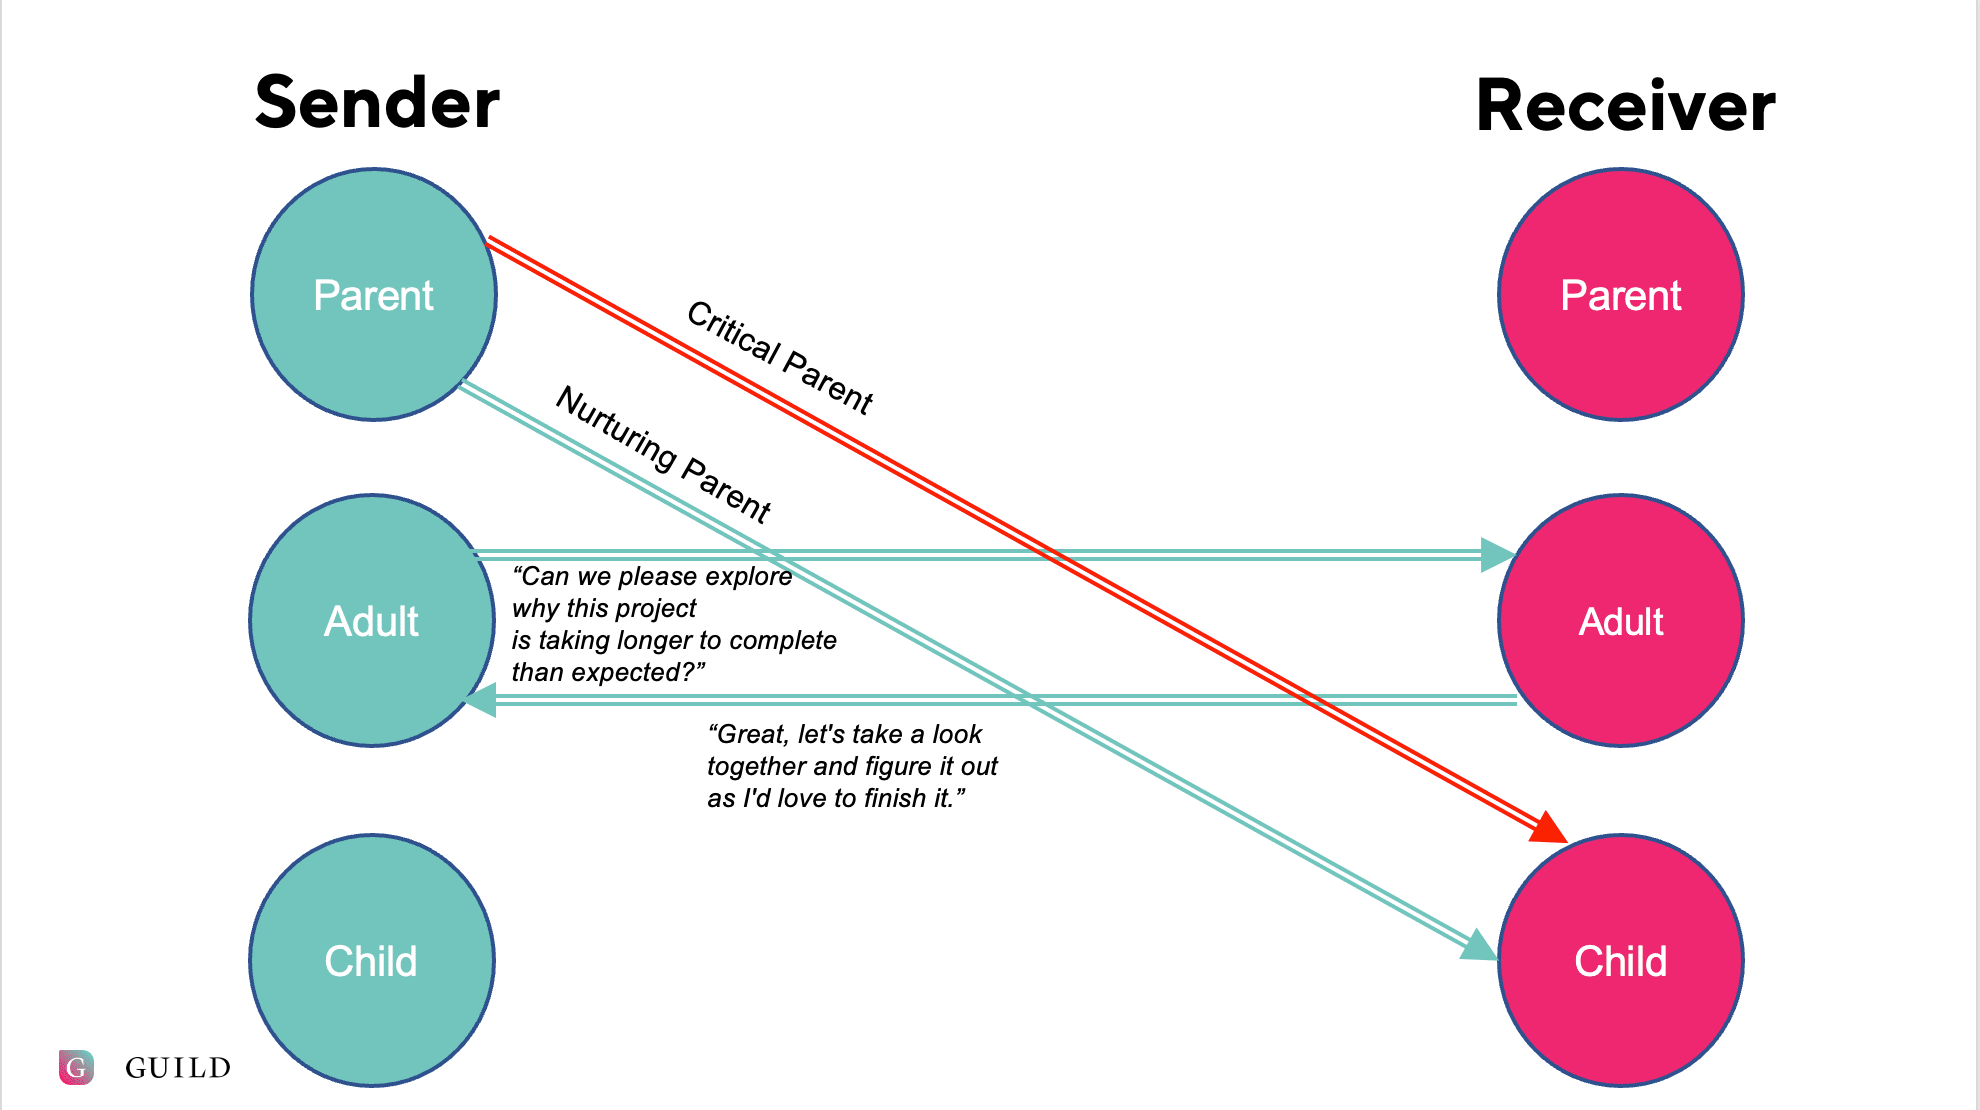 Diagram showing different "sender" and "receiver" interactions, with lines from Parent Sender to Child Receiver, and Adult Sender to Adult Receiver 